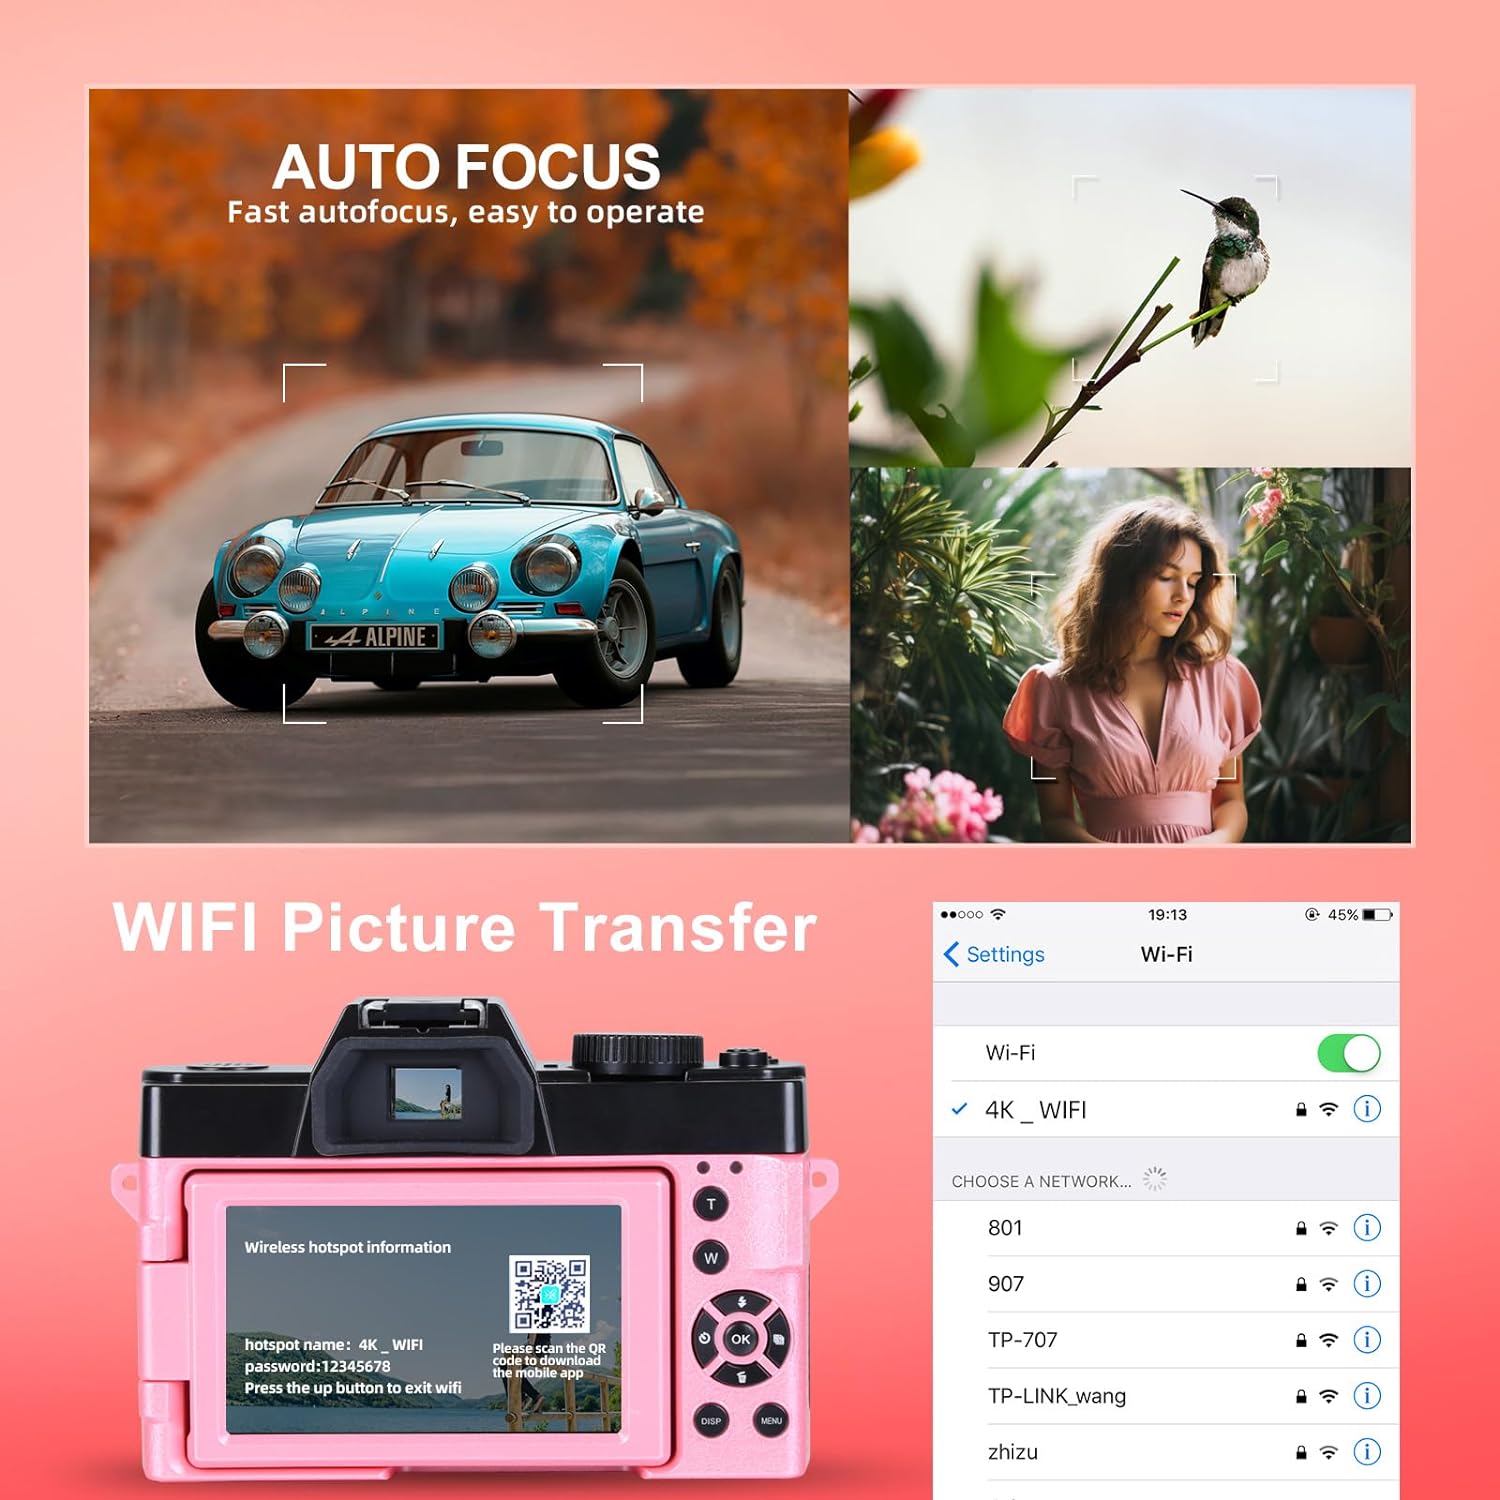 G-Anica Digital Cameras for Photography, 48MP&4K Video/Vlogging Camera for YouTube with WiFi, 60FPS Autofocus Travel Camera with Wide-Angle & Macro Lens (2 Batteries)